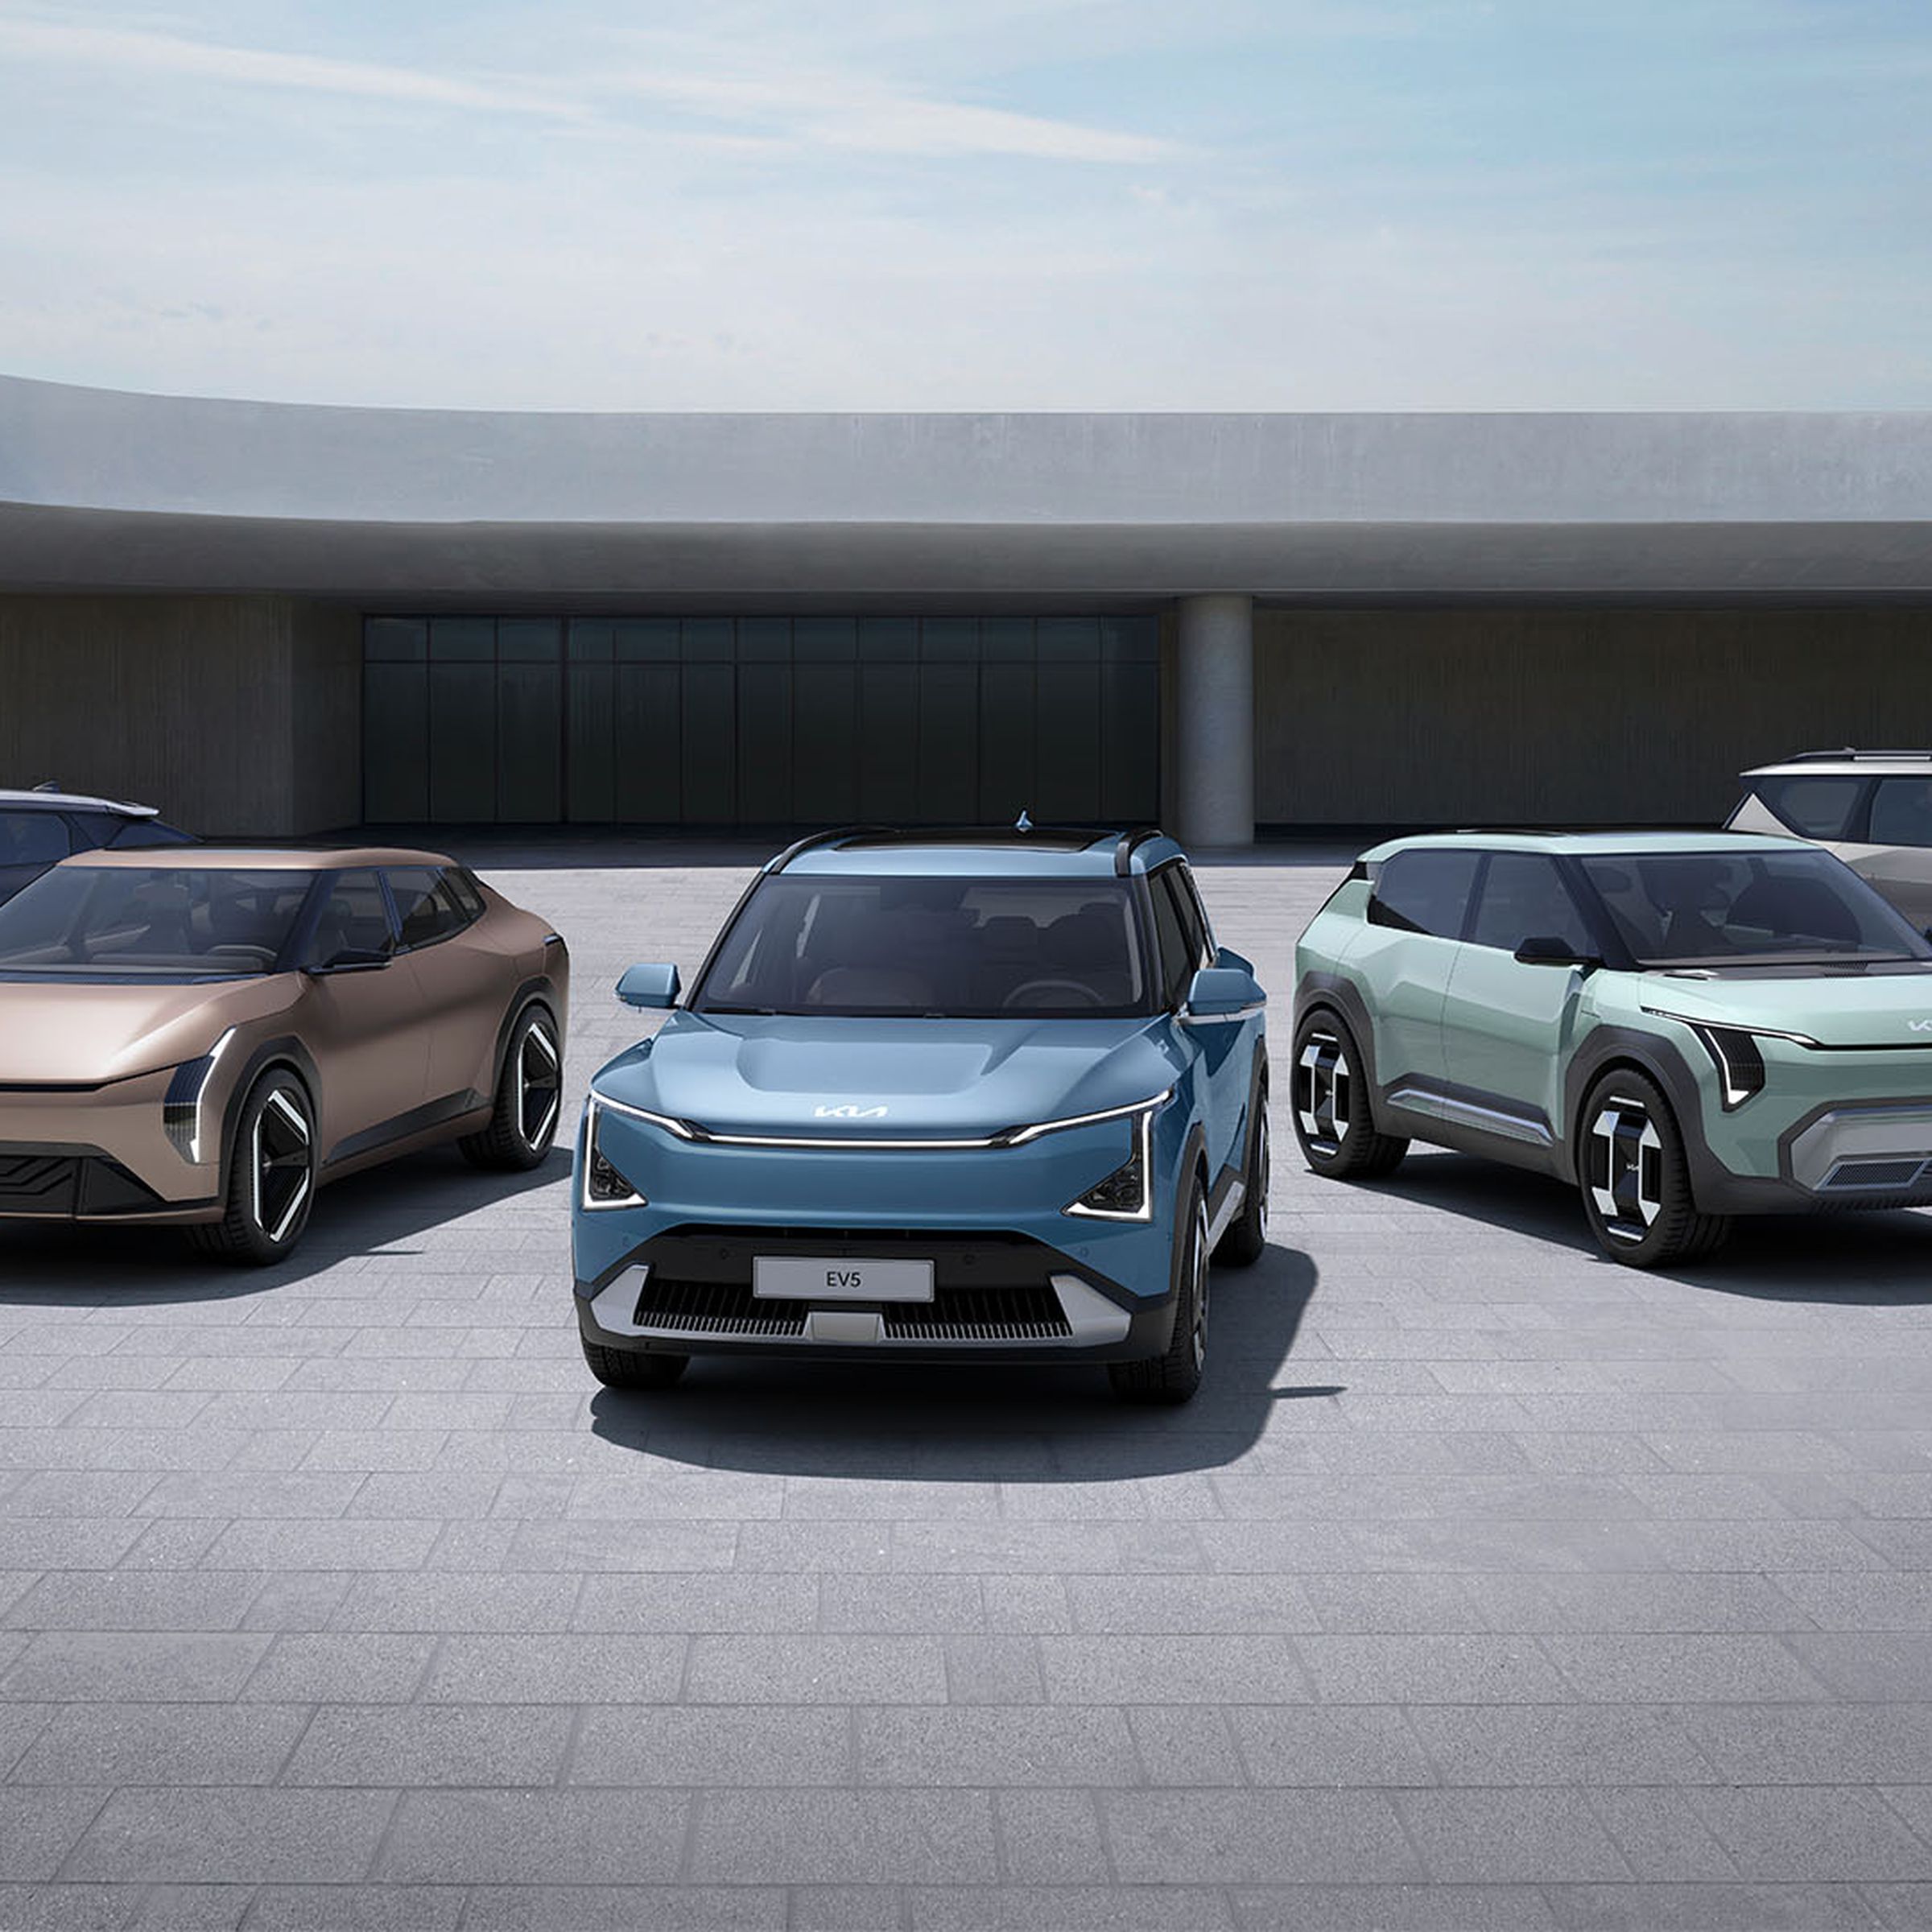 five electric kia vehicles fanned out in a modern architecture area with stone brick flooring